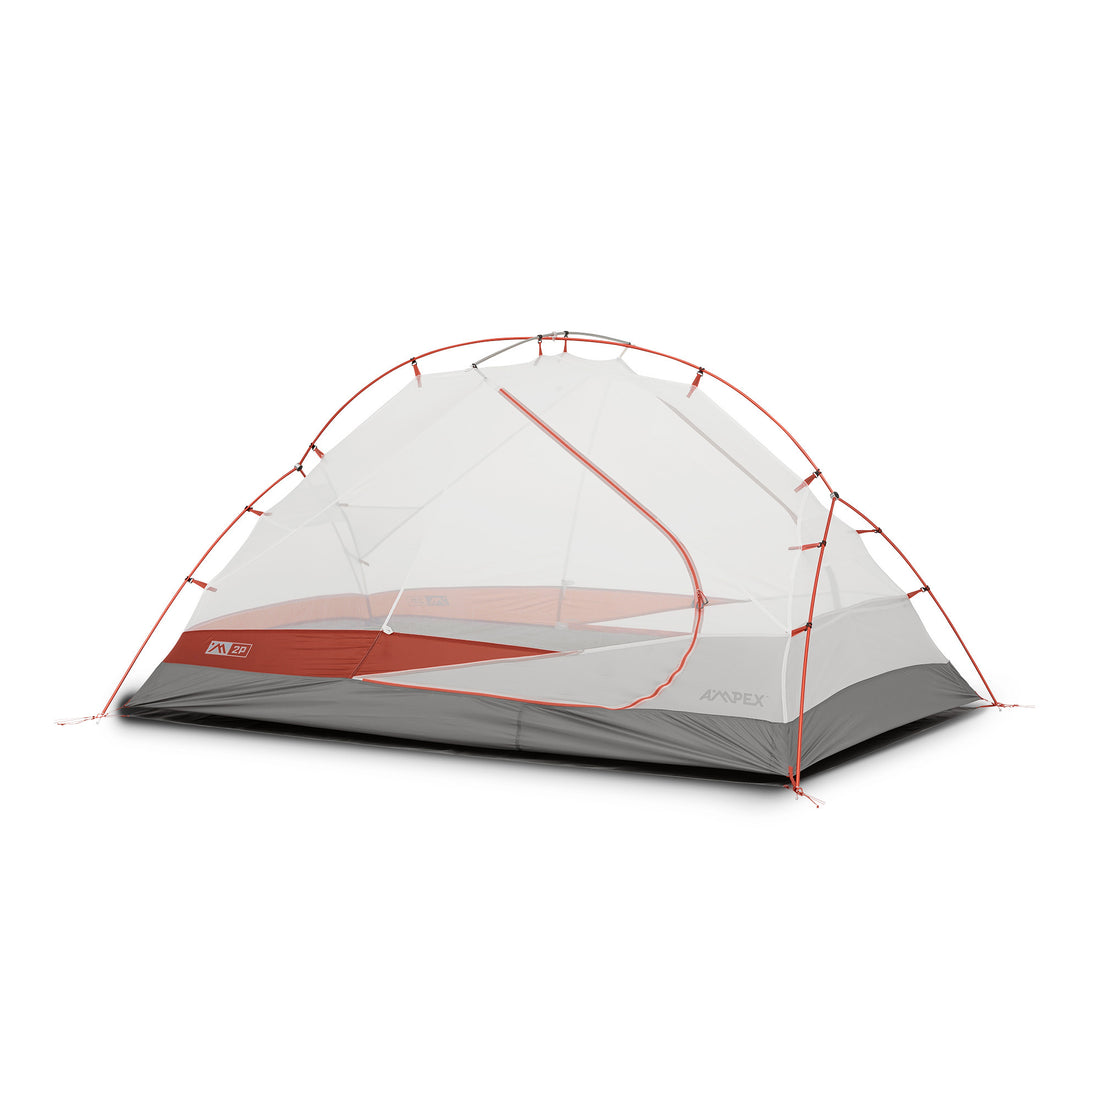 Lightweight Backpacking Tent | 2 Person